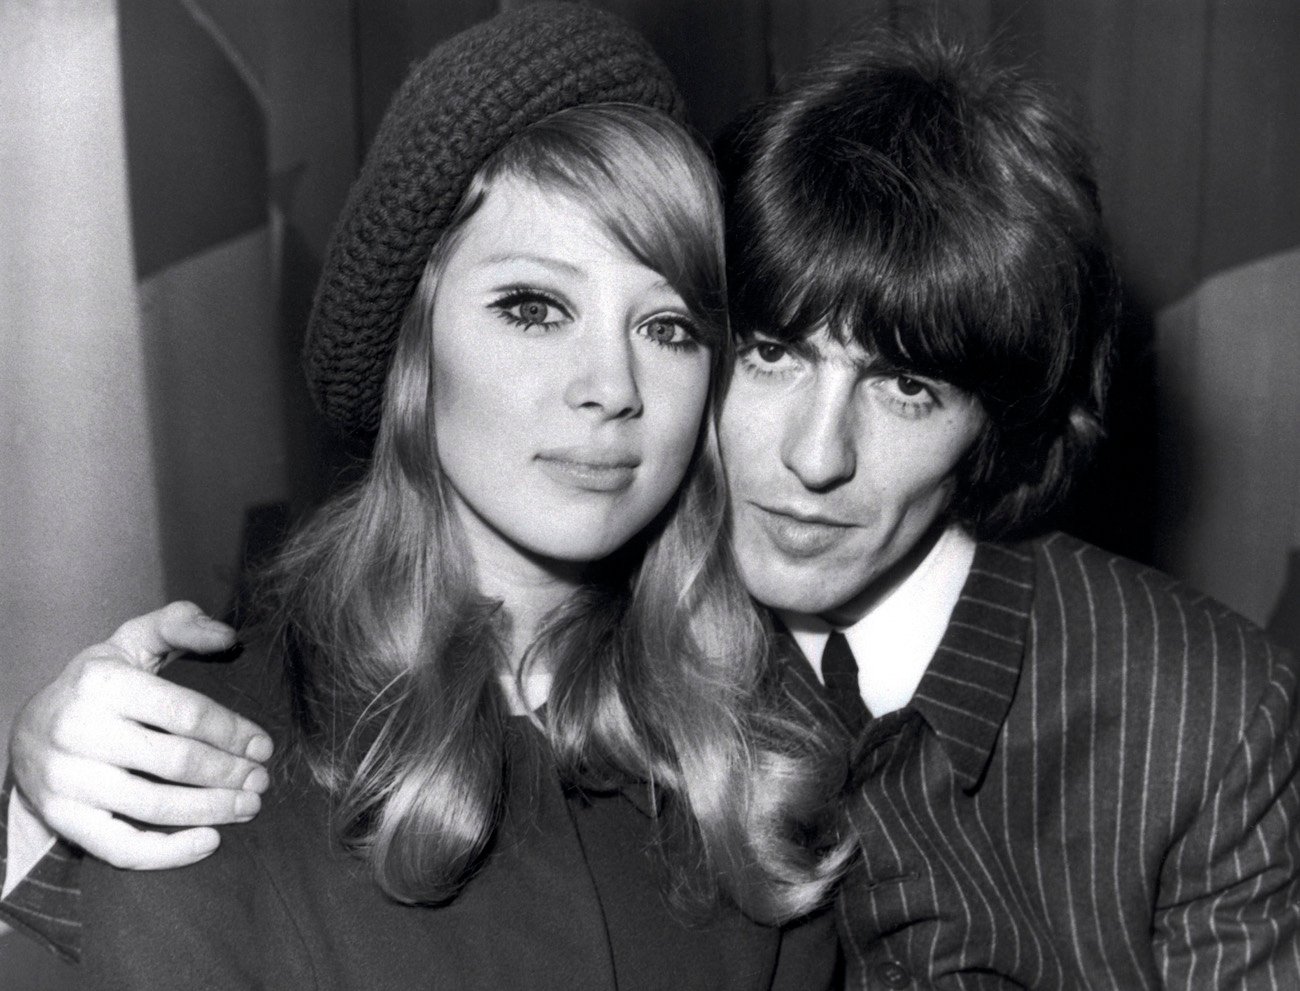 George Harrison and his wife, Pattie Boyd on their wedding day in 1966.